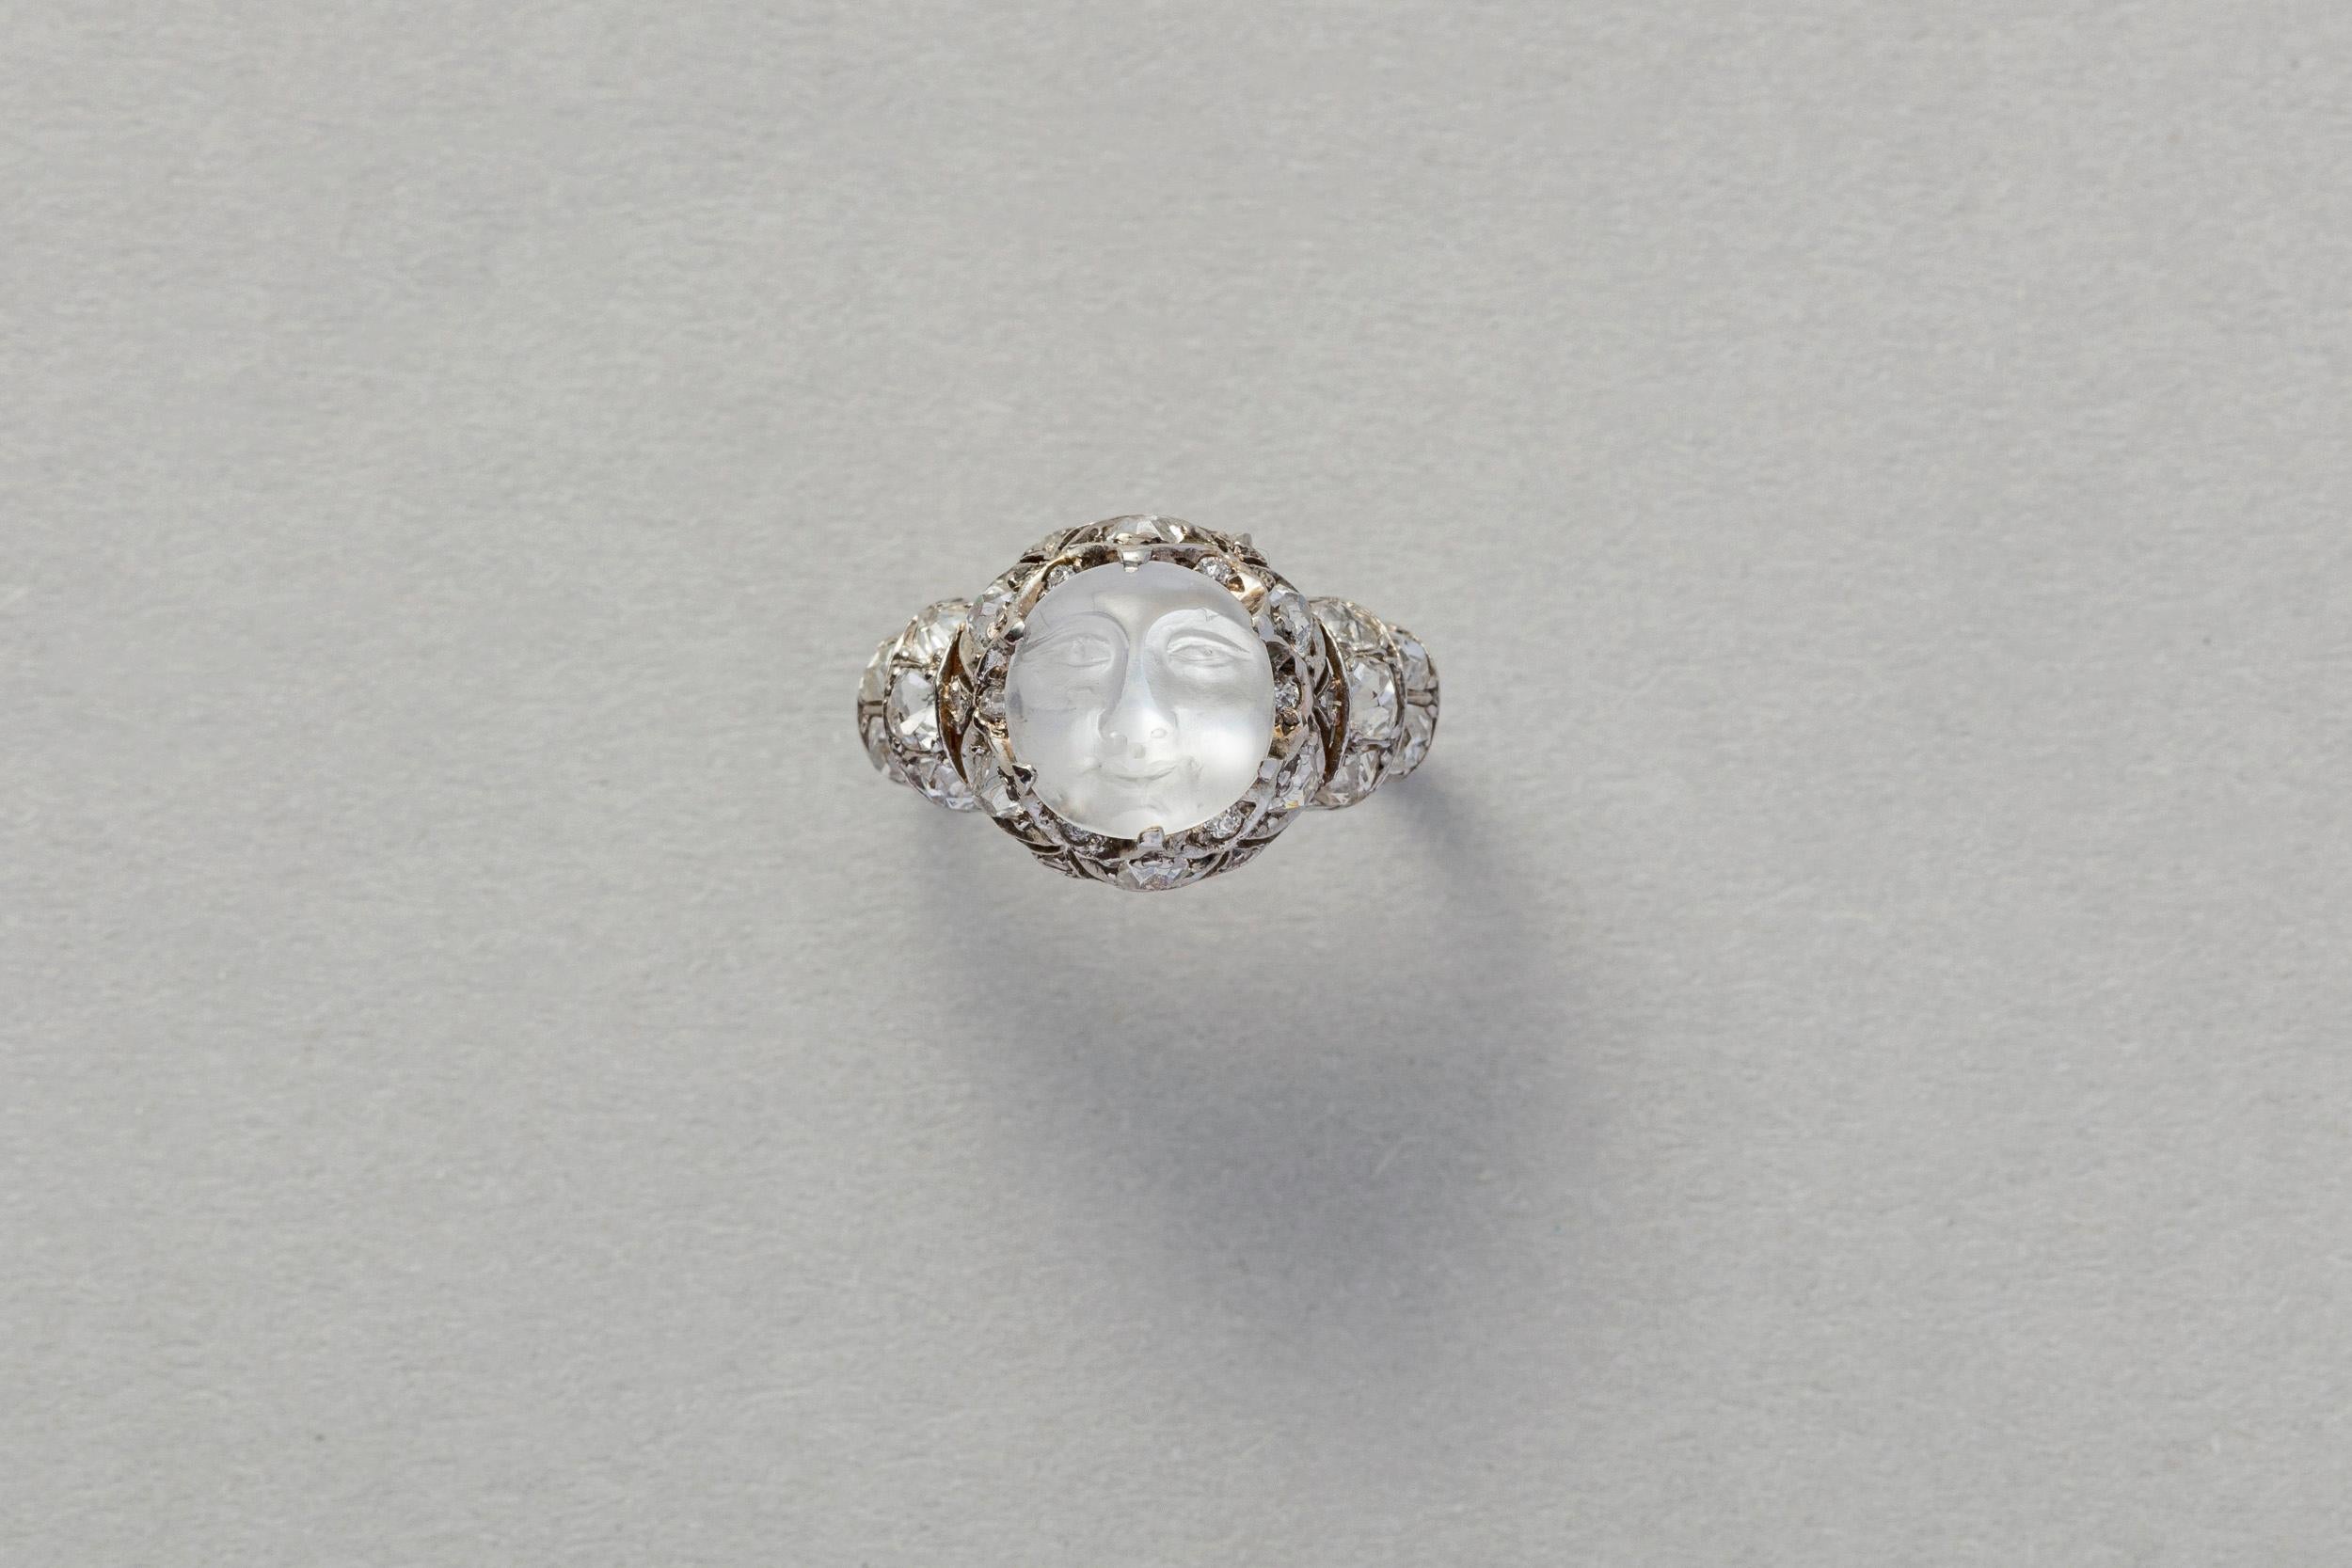 A sweet Edwardian platinum ring set with a round, silky white moonstone engraved with the face of the moon. Around and underneath the six prongs are different size and shape old cut and rose cut diamonds. On the shank of the ring are two curves one